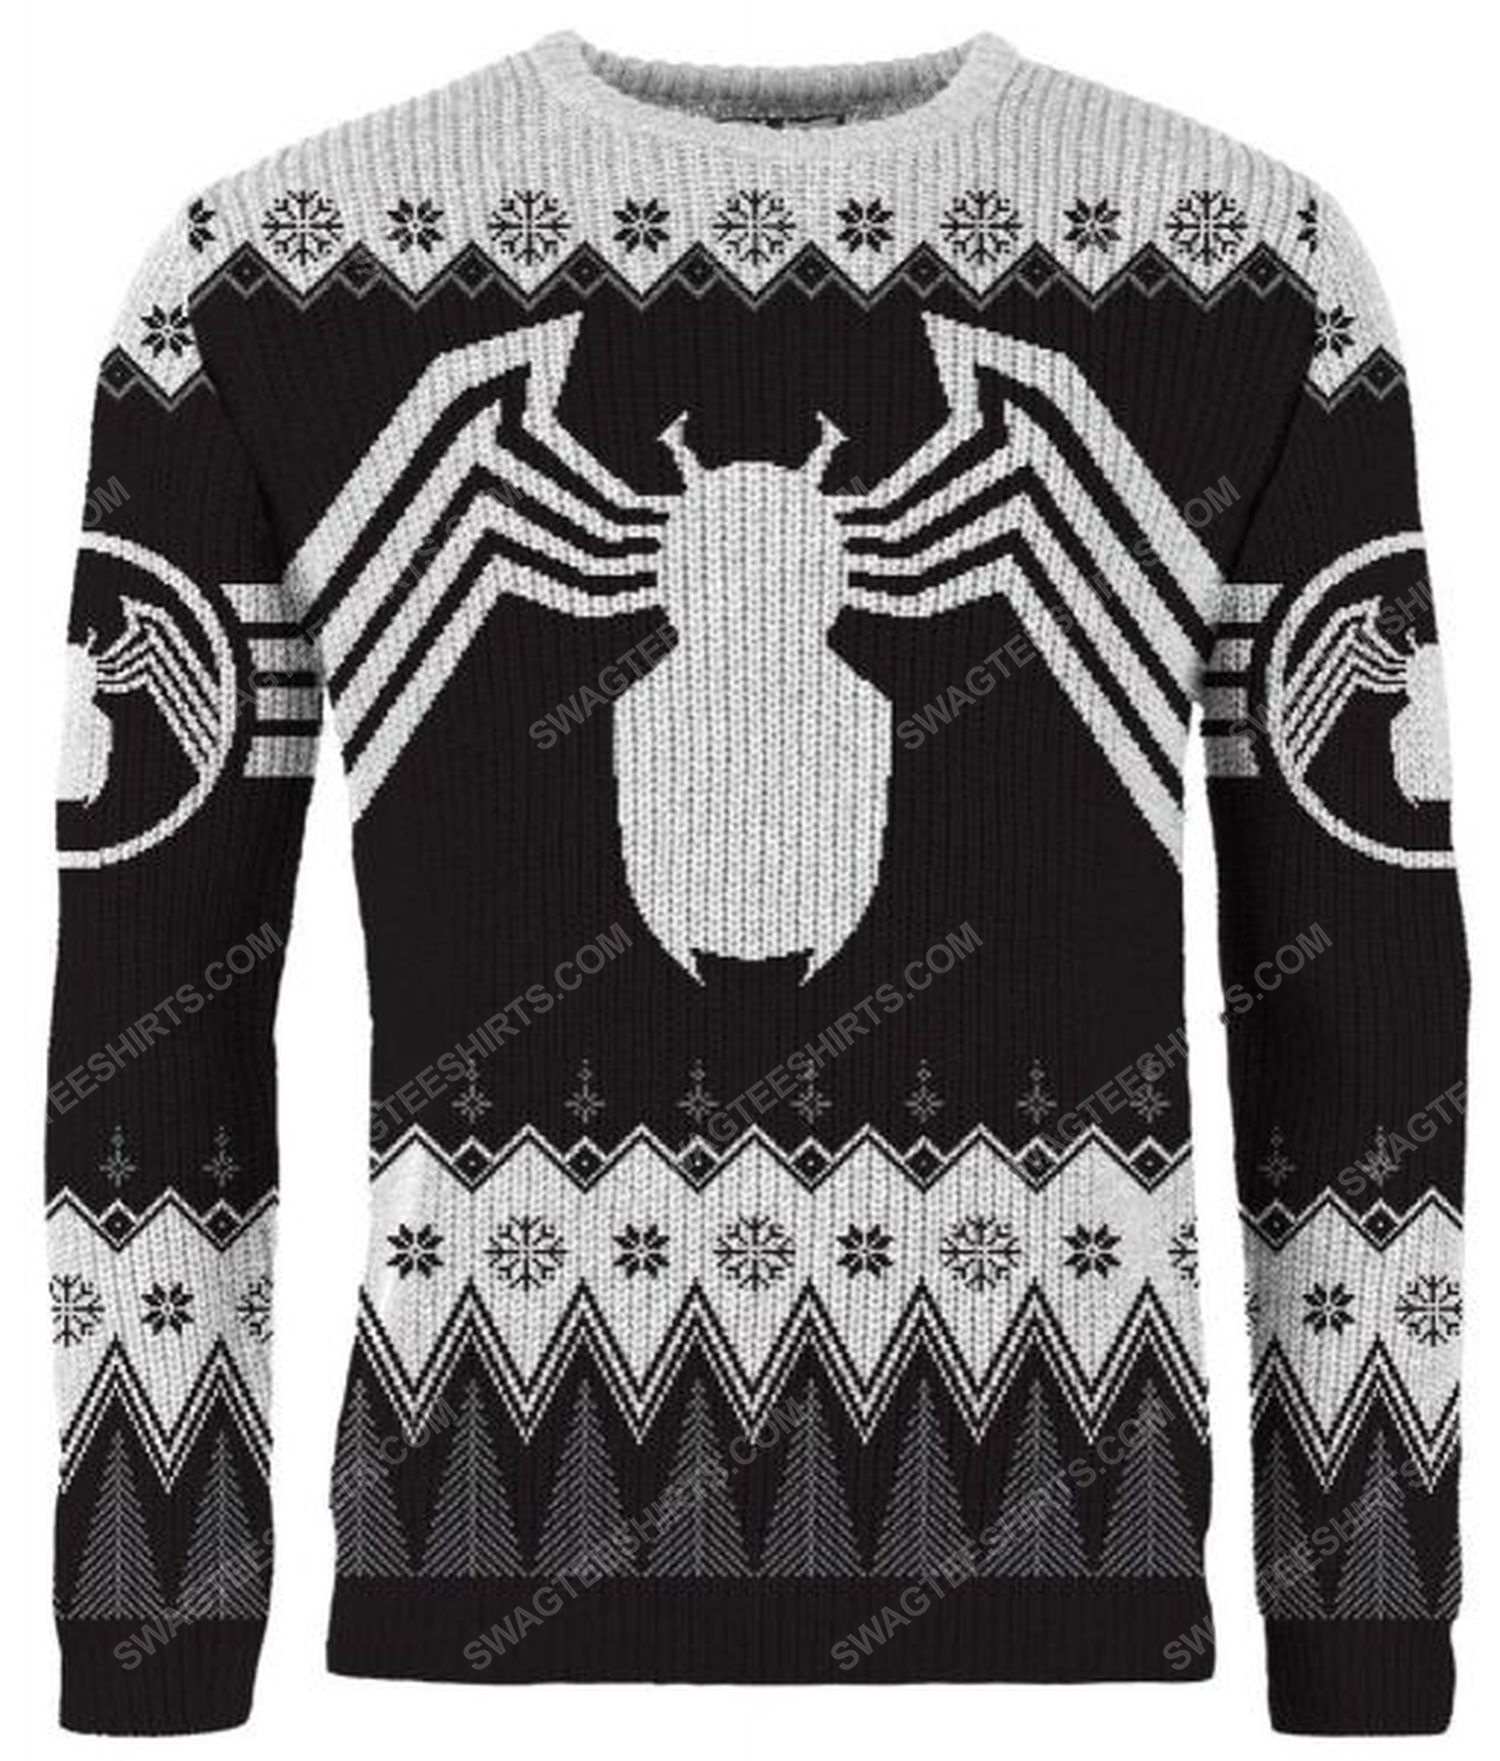 [special edition] Christmas holiday marvel venom full print ugly christmas sweater – maria